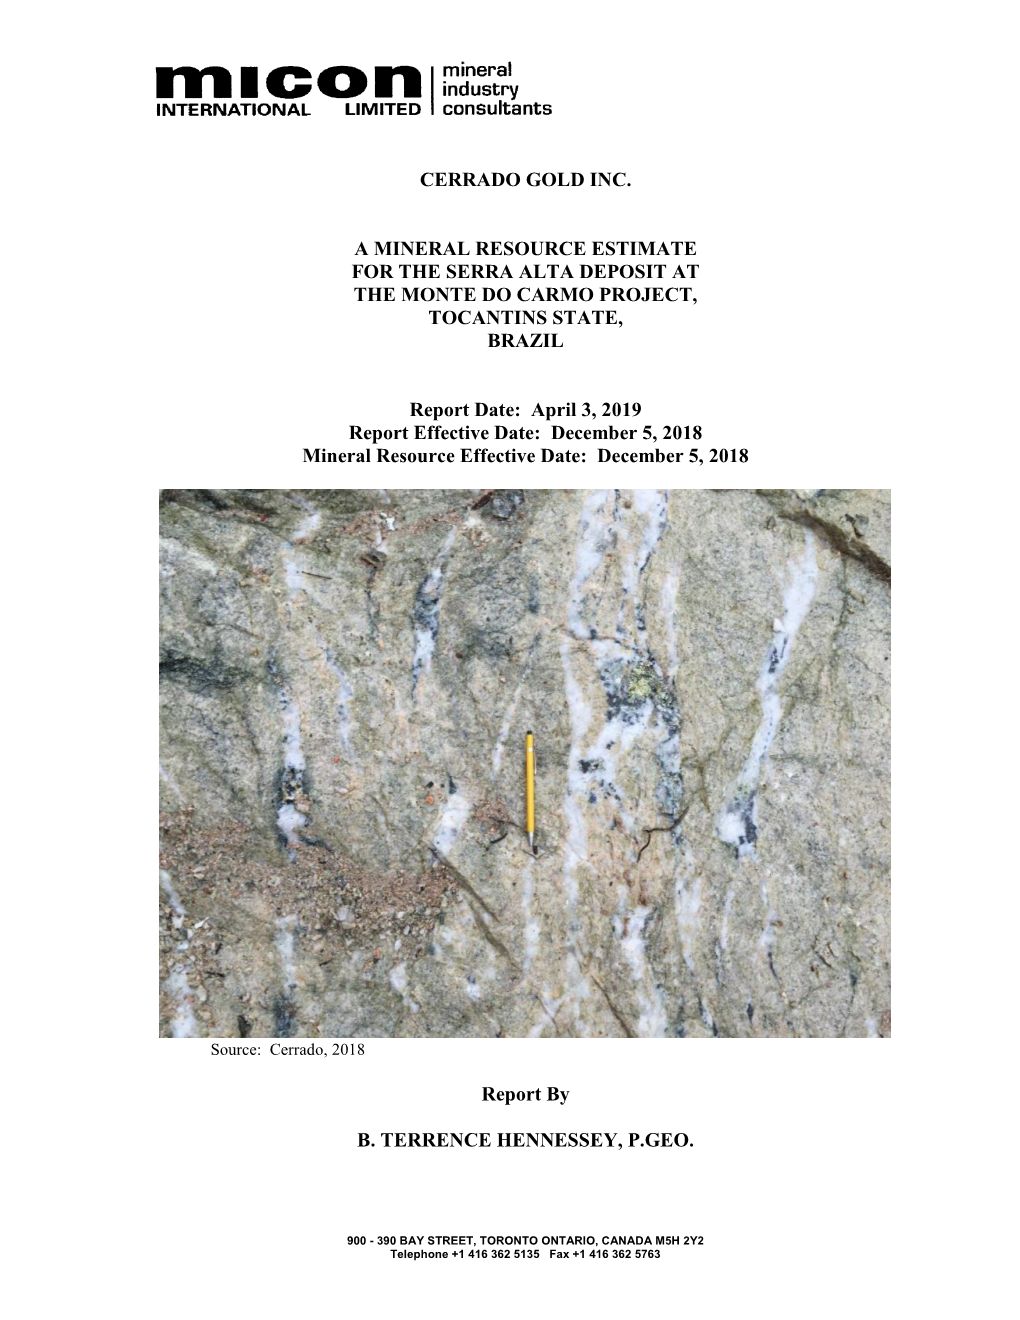 Cerrado Gold Inc. a Mineral Resource Estimate for the Serra Alta Deposit at the Monte Do Carmo Project, Tocantins State, Brazil